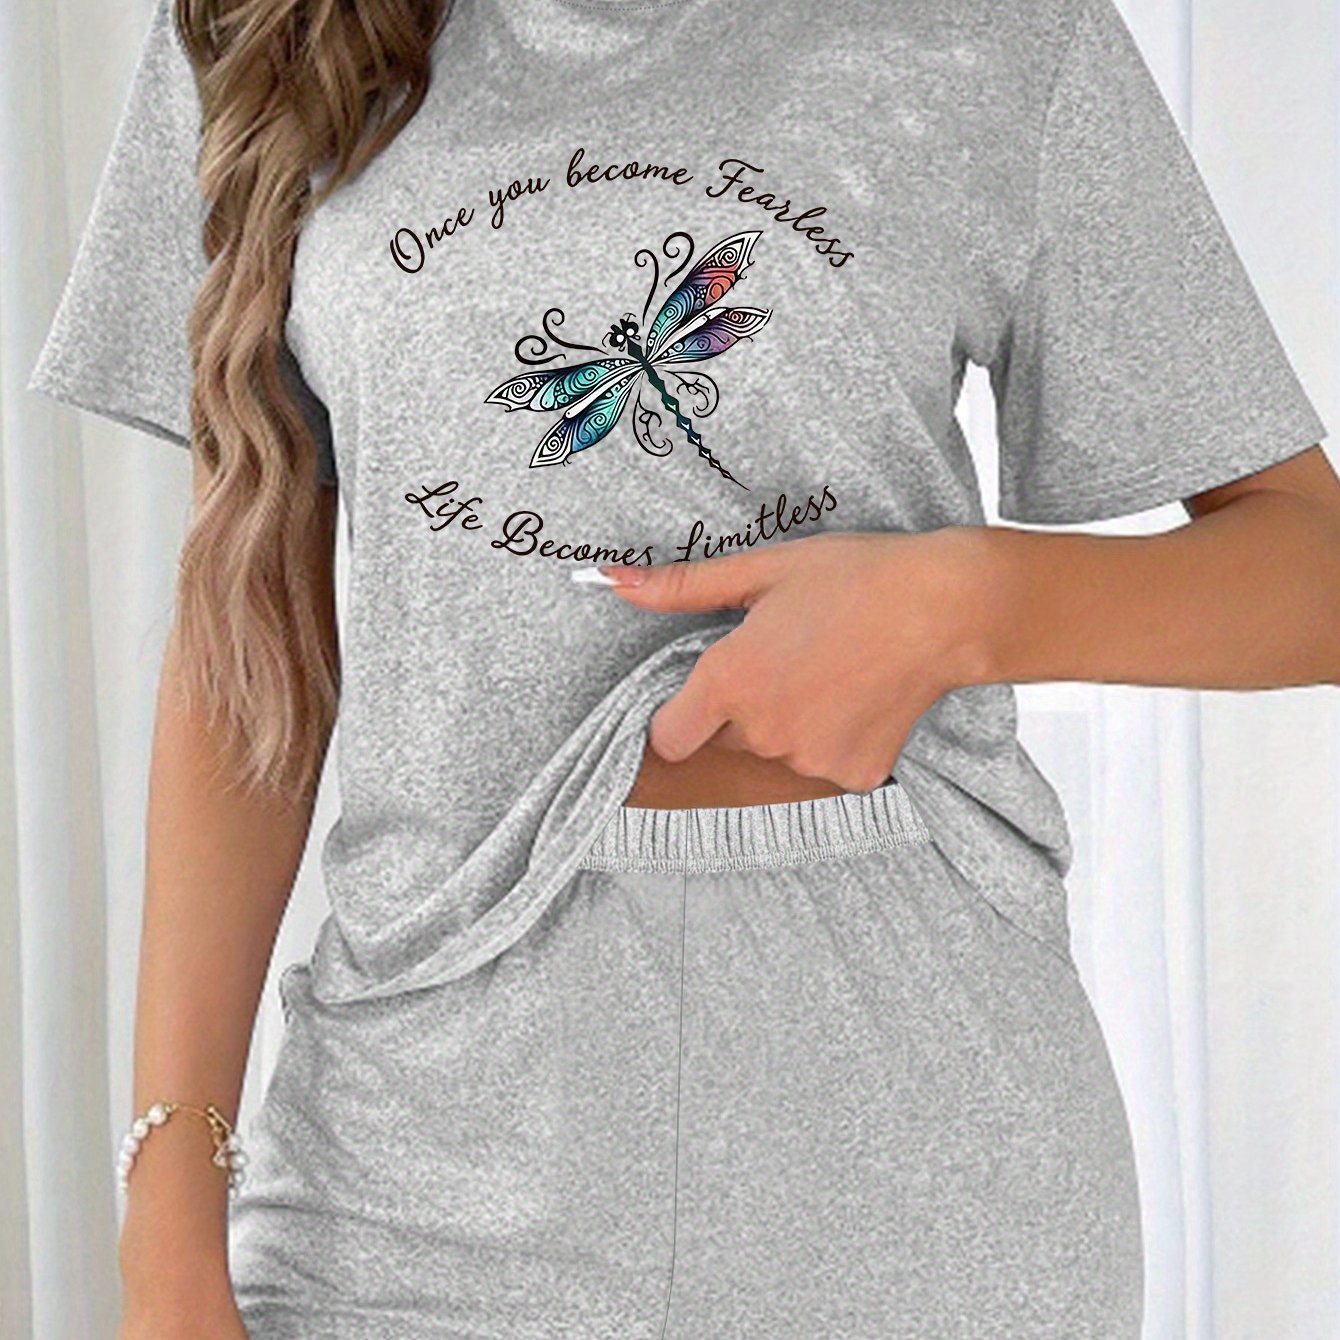 Once You Become Fearless Life Becomes Limitless Women's Christian Short Pajama Set claimedbygoddesigns